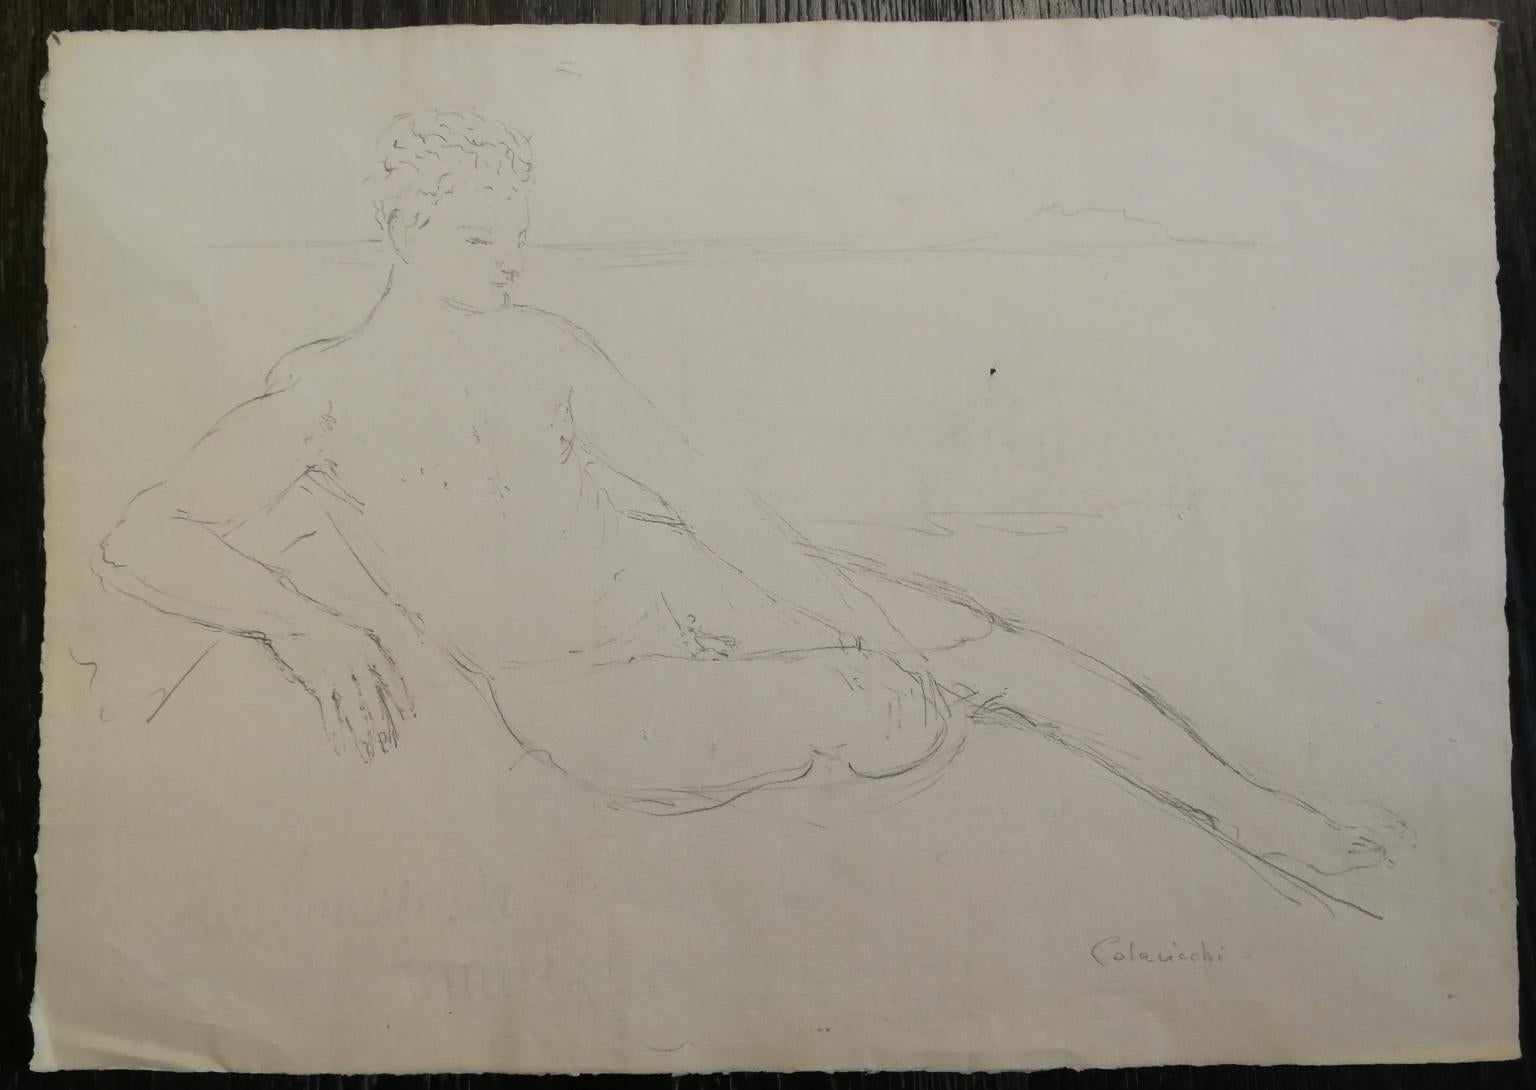 The drawing, signed 